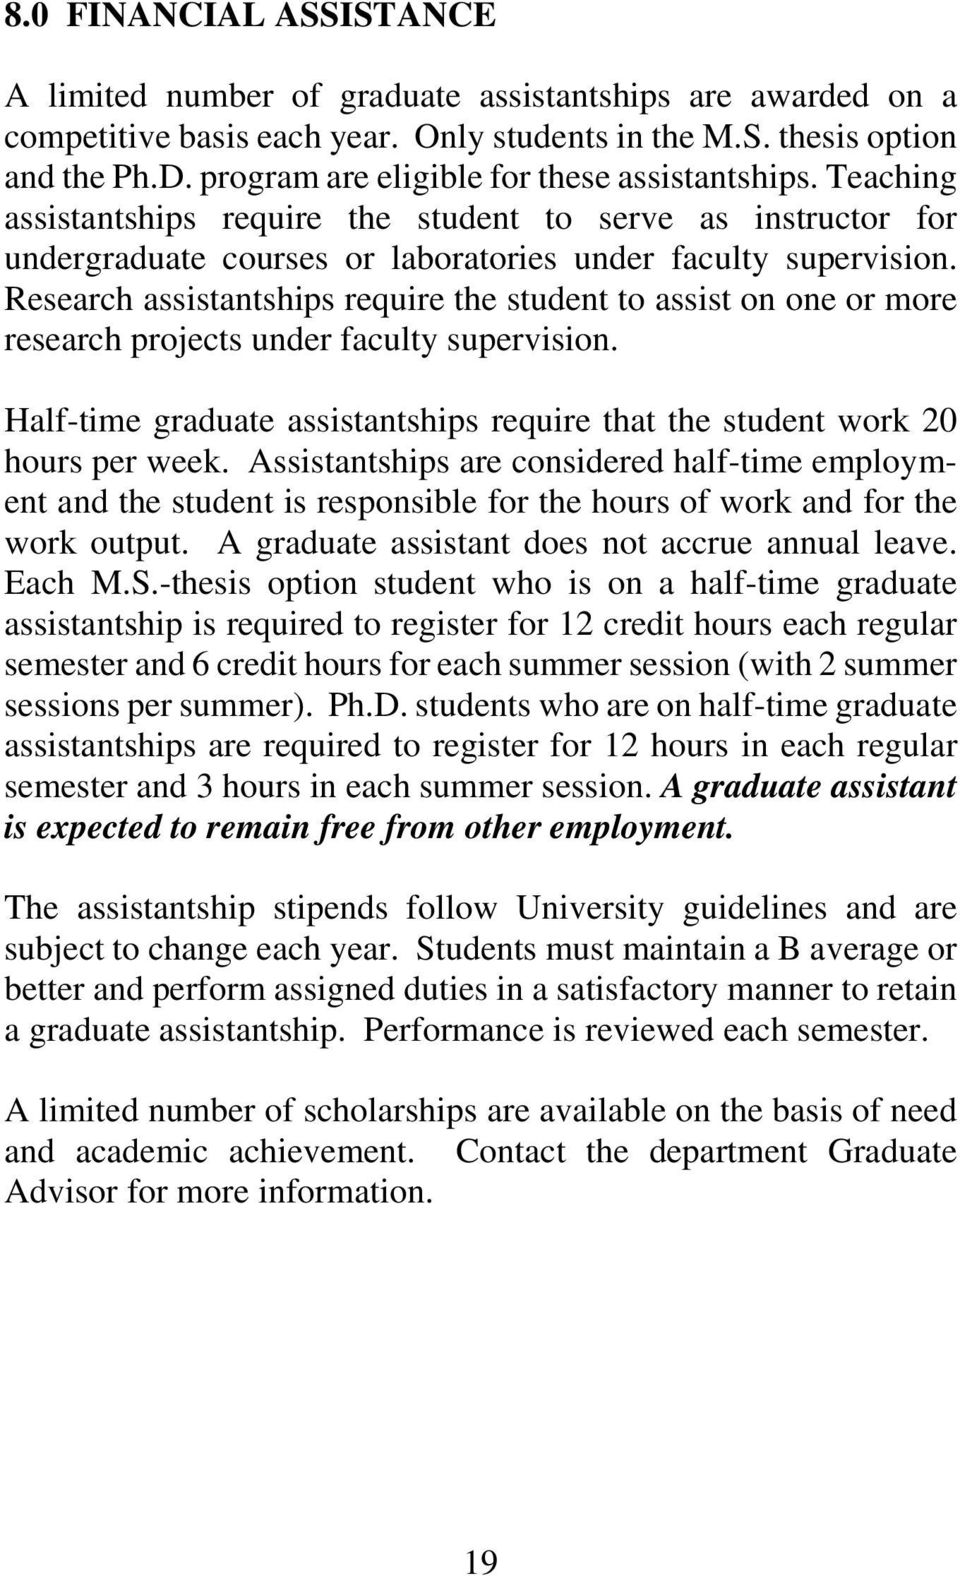 Research assistantships require the student to assist on one or more research projects under faculty supervision. Half-time graduate assistantships require that the student work 20 hours per week.